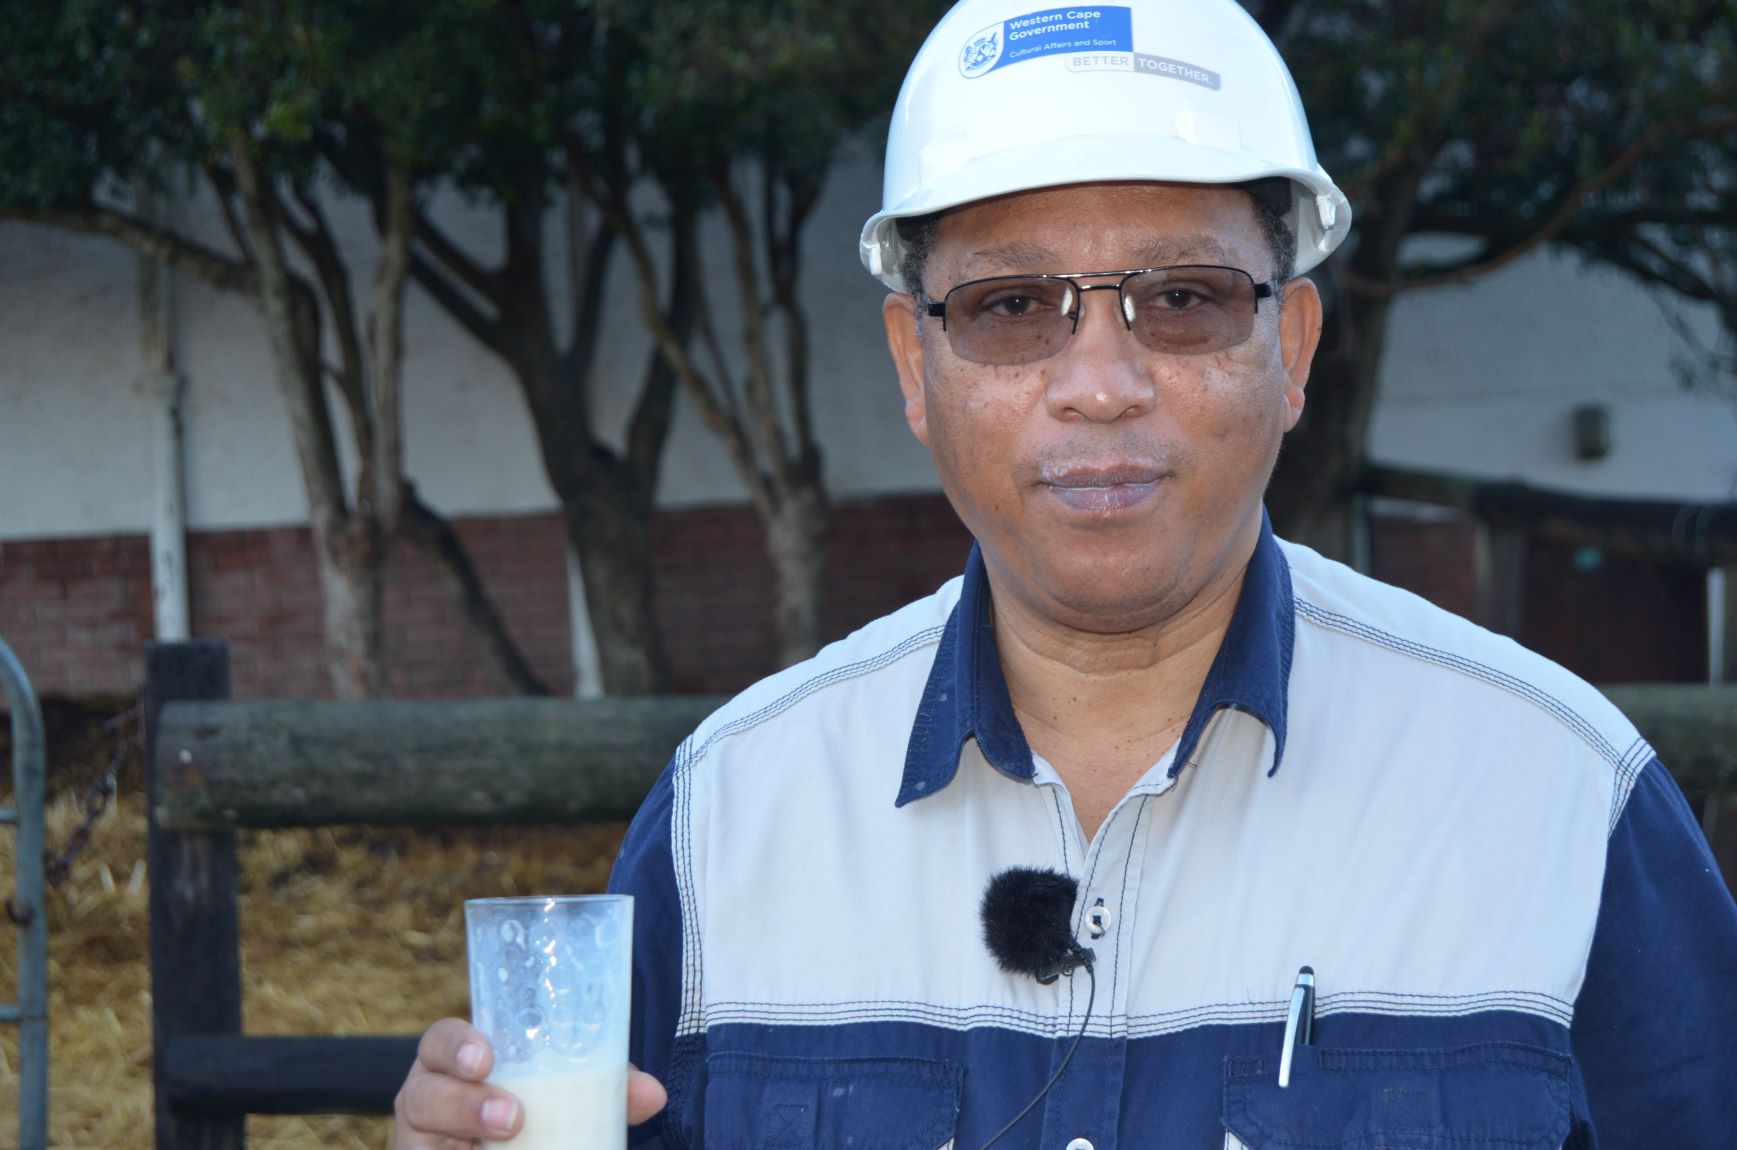 Minister Meyer celebrates World Milk Day with a glass of milk